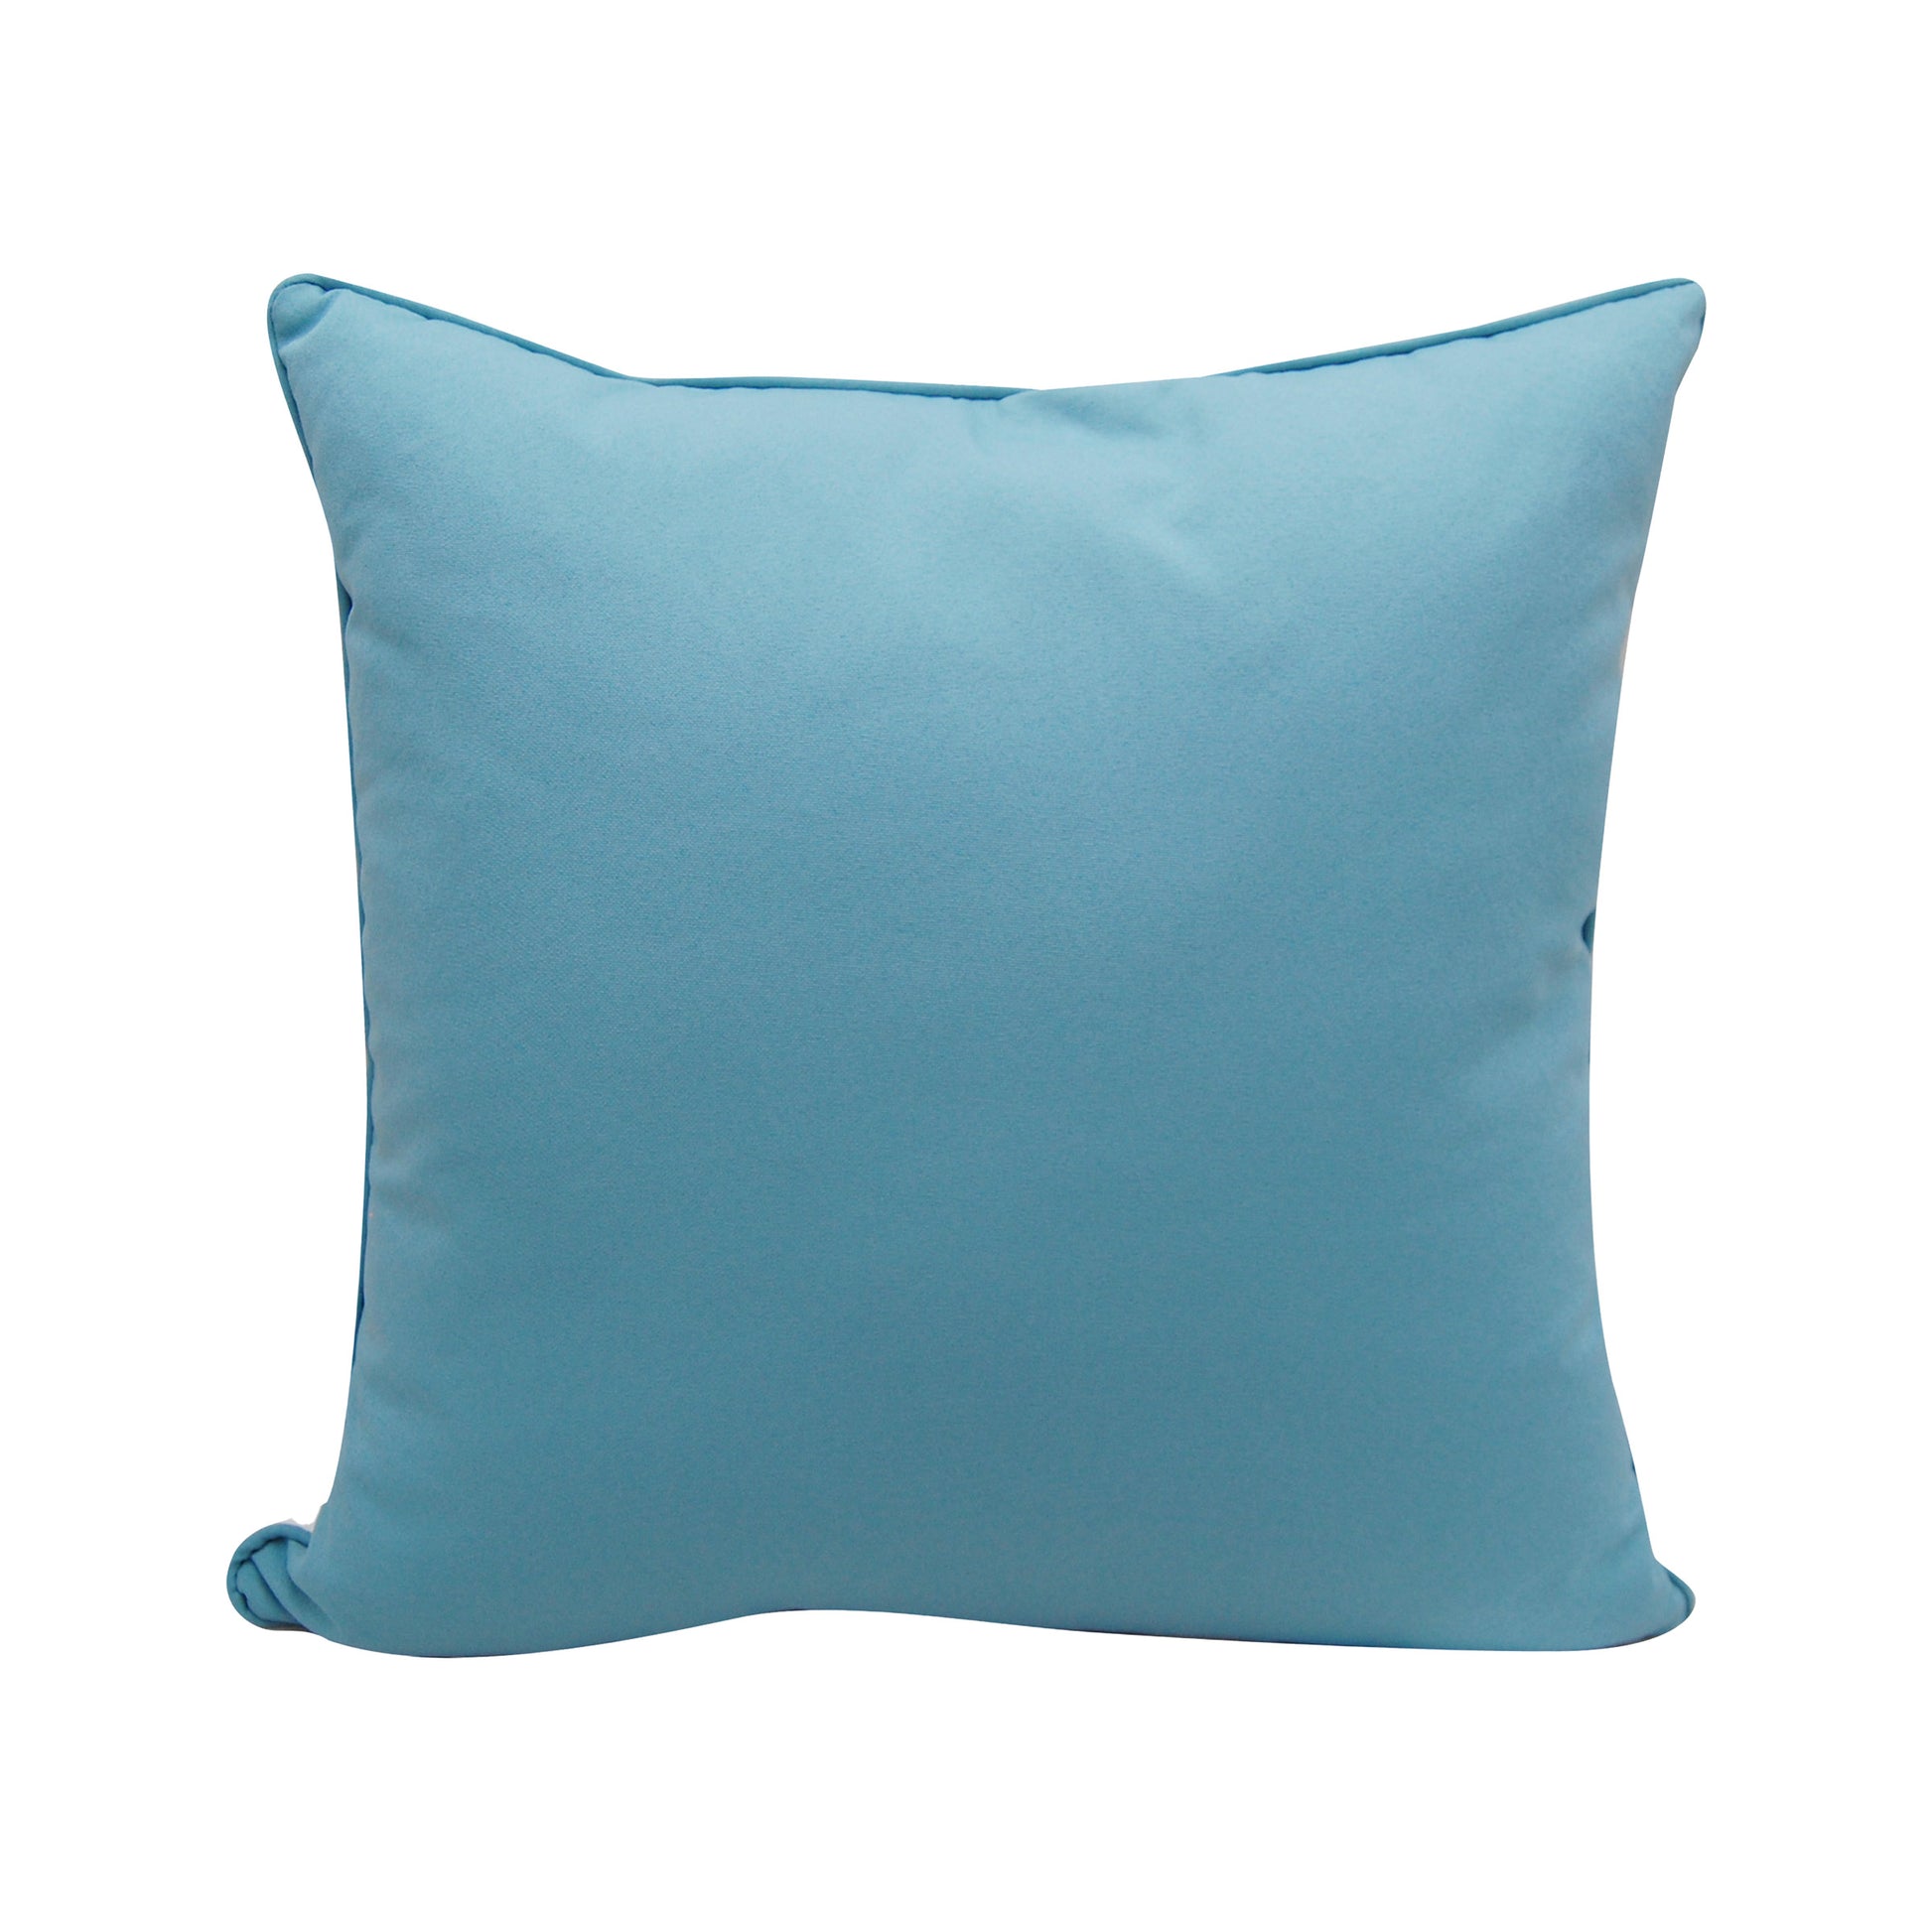 Solid blue; back of Cockatoo with Leaves pillow.